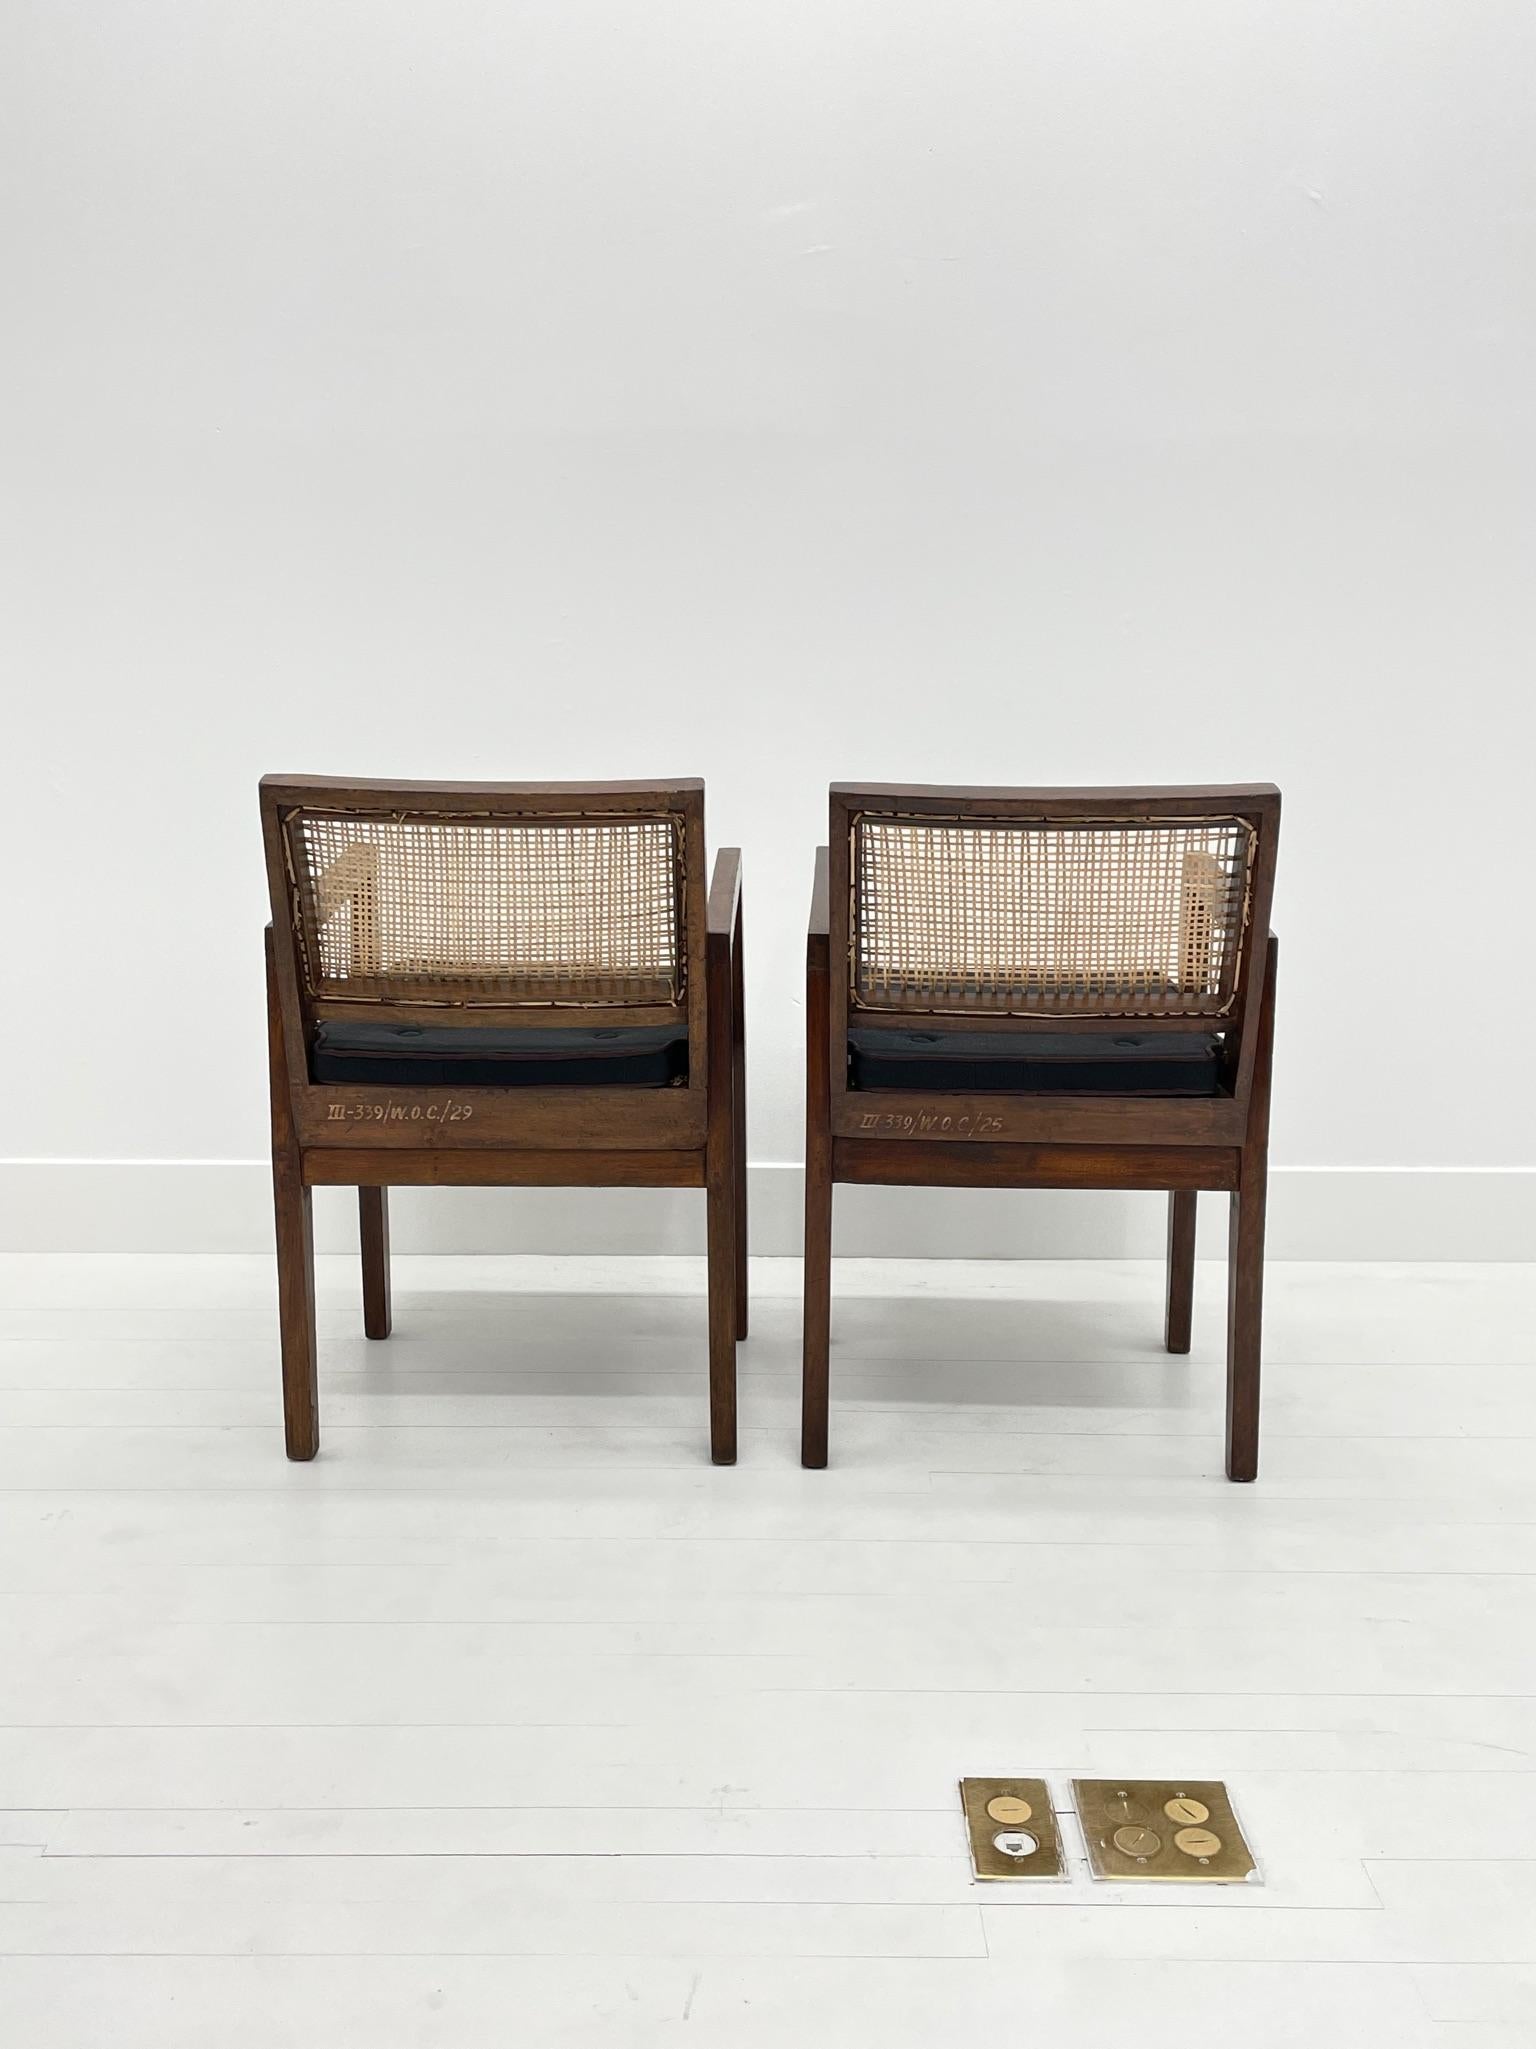 Pierre Jeanneret Armchairs from Chandigarh, pair, c. 1955 For Sale 5